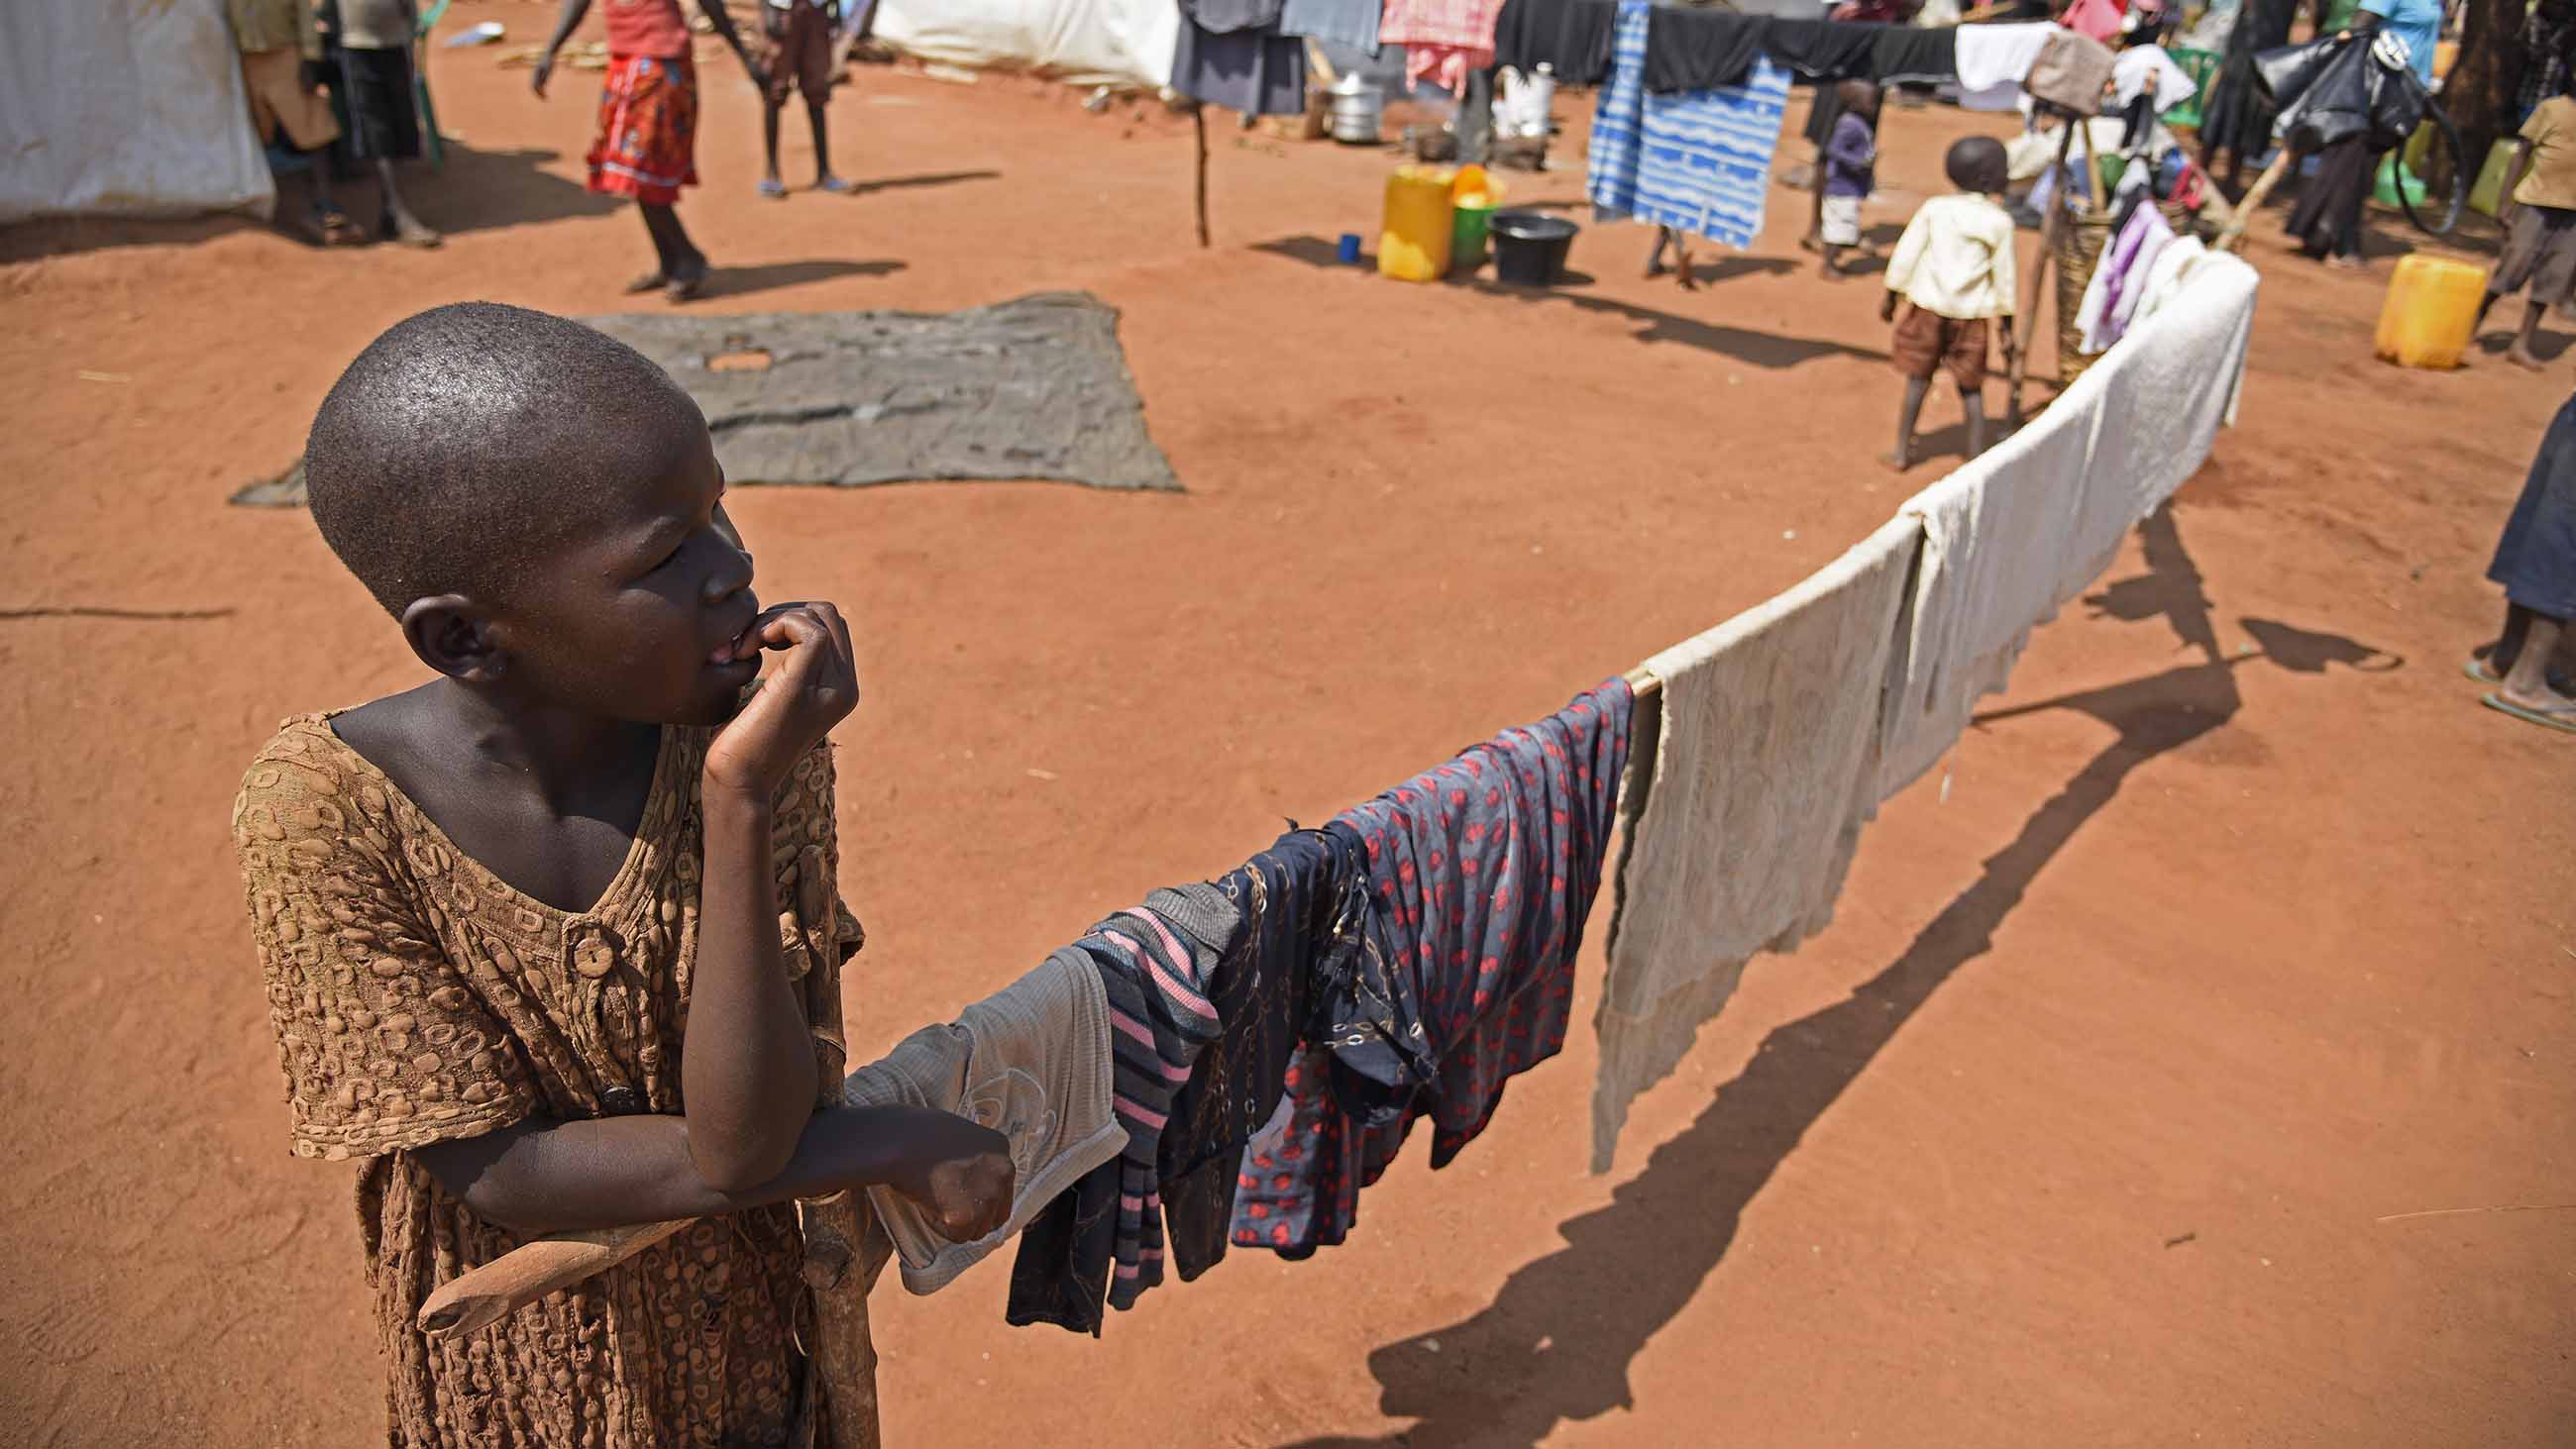 A South Sudanese refugee boy lingers on a hot afternoon in the Pagirinya refugee settlement in Uganda.